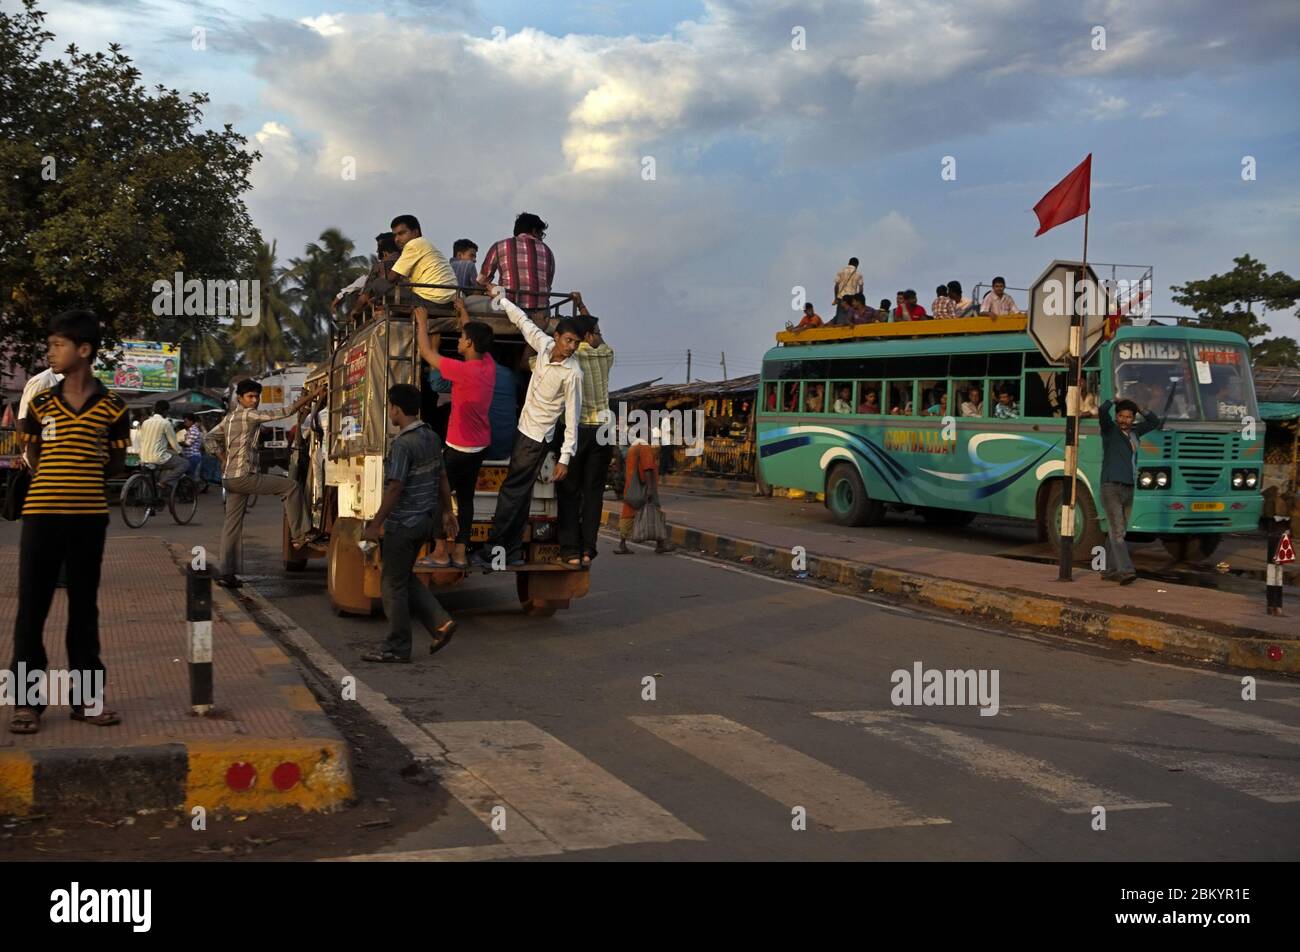 Street life and public transportation in a junction of Kolaghat, a census town in Purba Medinipur district, West Bengal state, India. © Reynold Sumayku Stock Photo